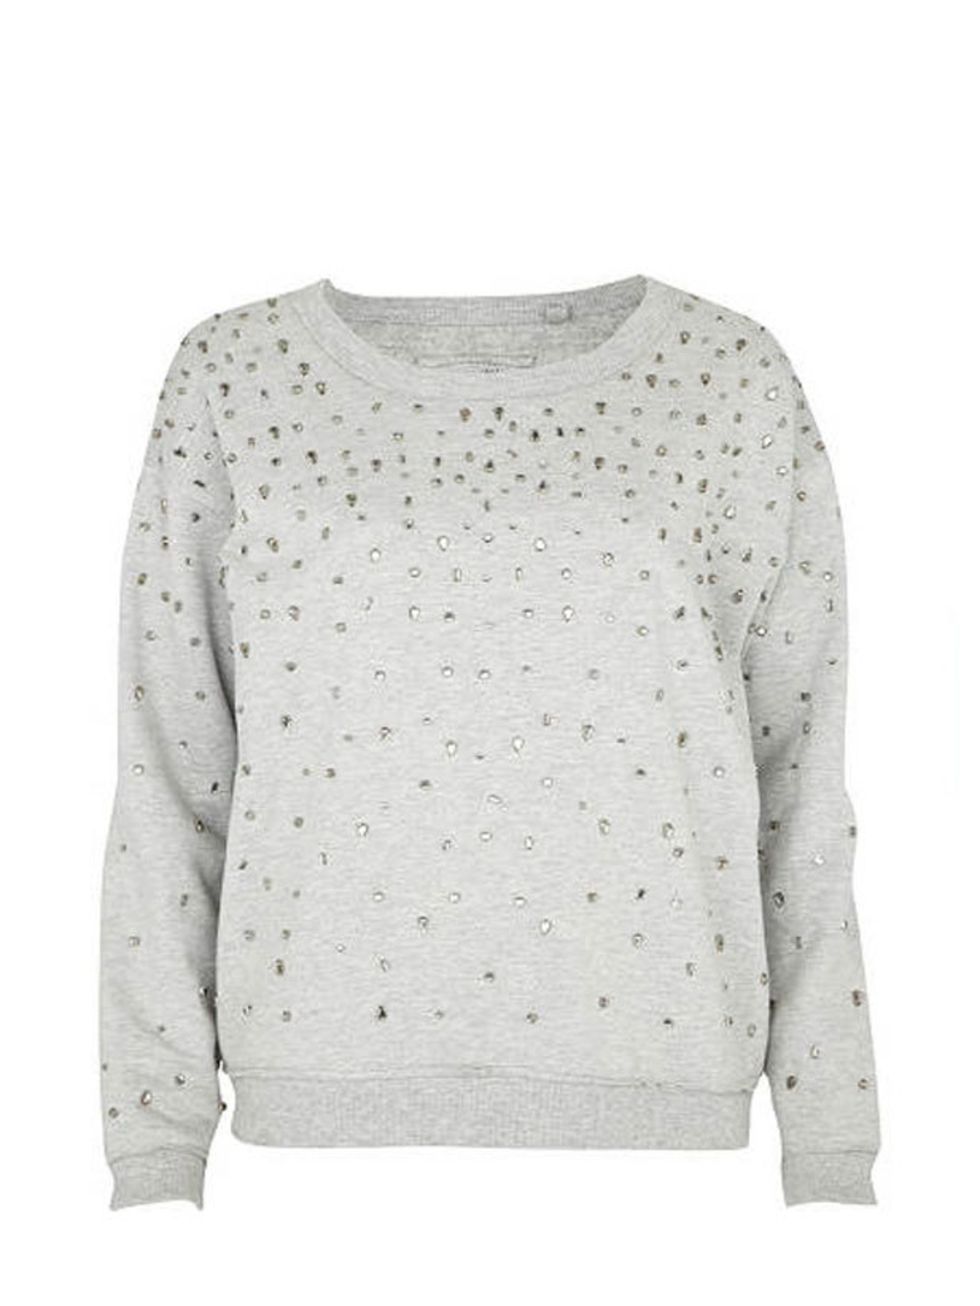 <p> </p><p> </p><p>Styled with everything from a maxi skirt to leather shorts, this embellished sweater will be a winter staple. <a href="http://www.riverisland.com/Online/women/tops/casual-tops/grey-cluster-jewel-sweat-top-596067">River Island</a> grey e